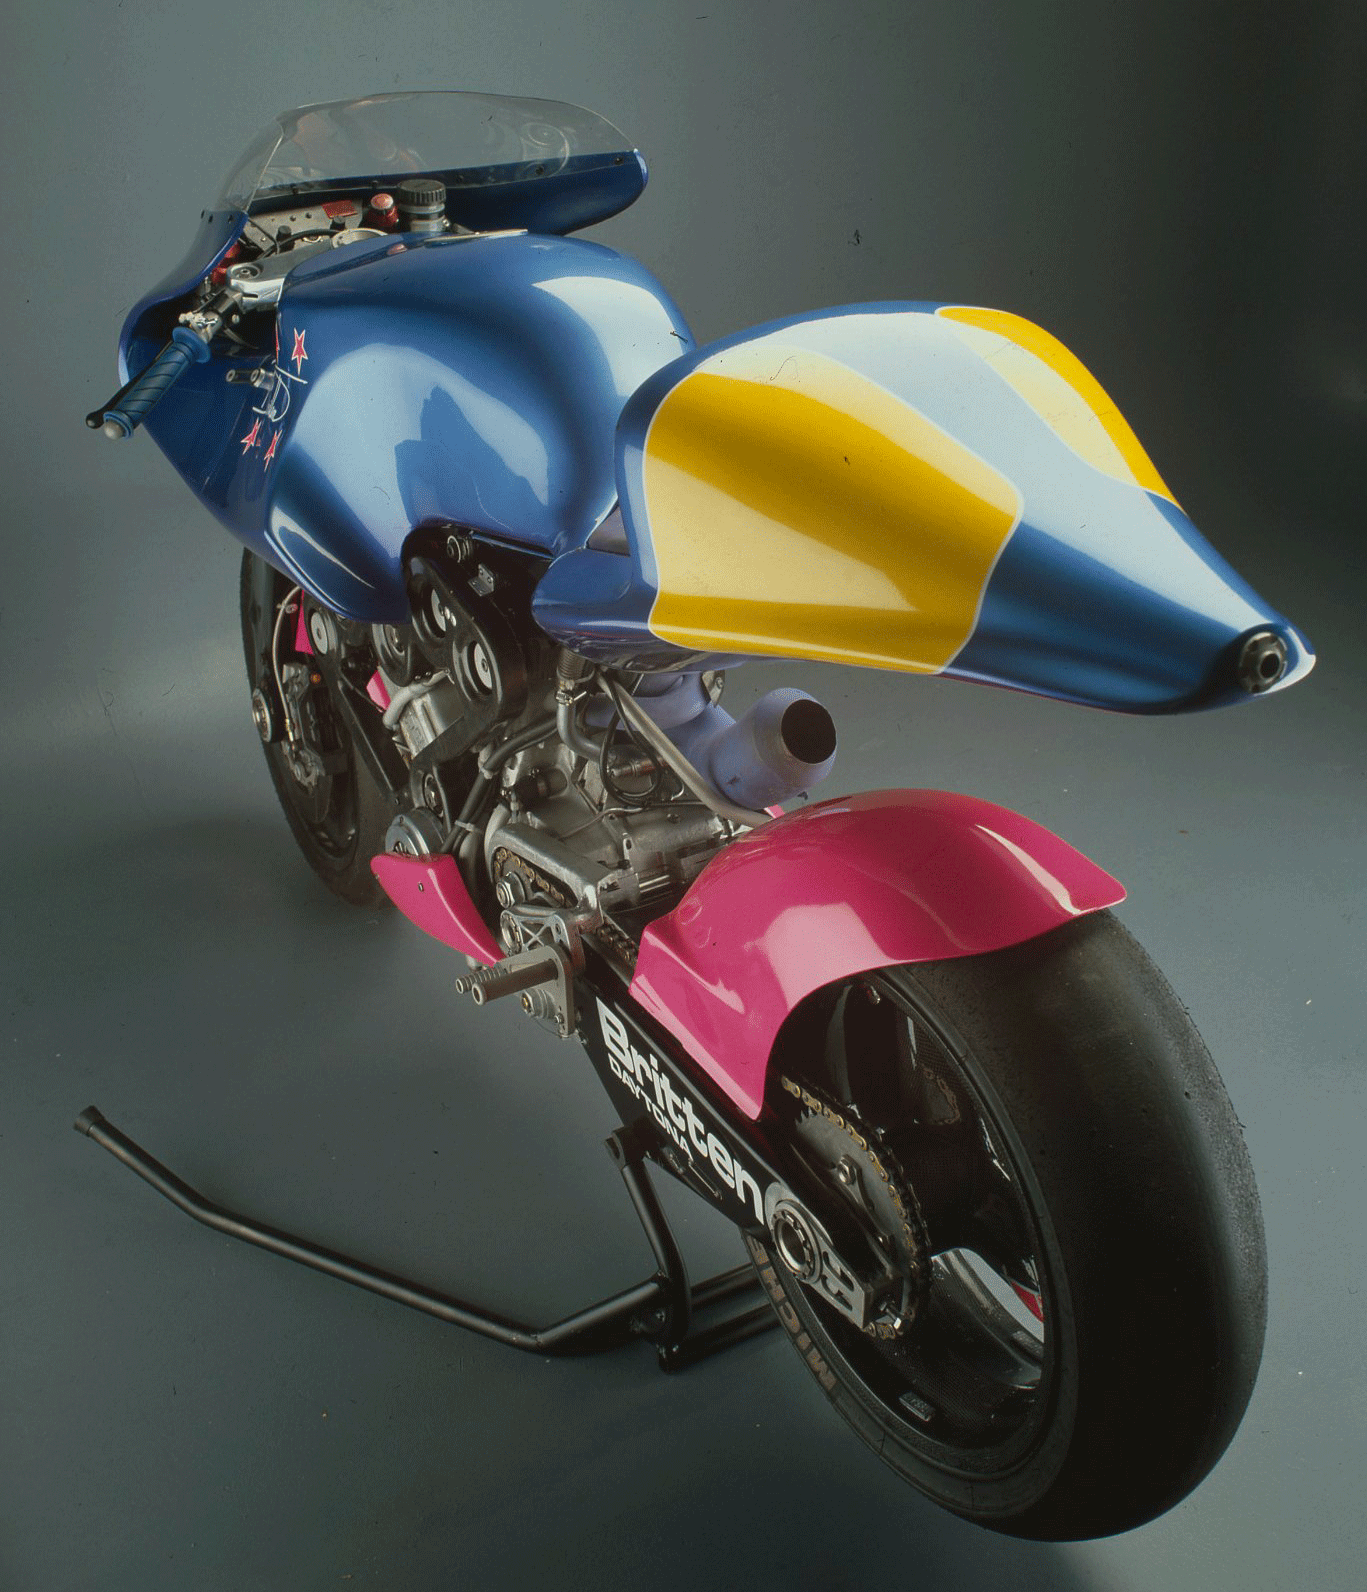 This Britten V-1100 racebike pairs innovative engine and suspension tech with minimalist bodywork.”